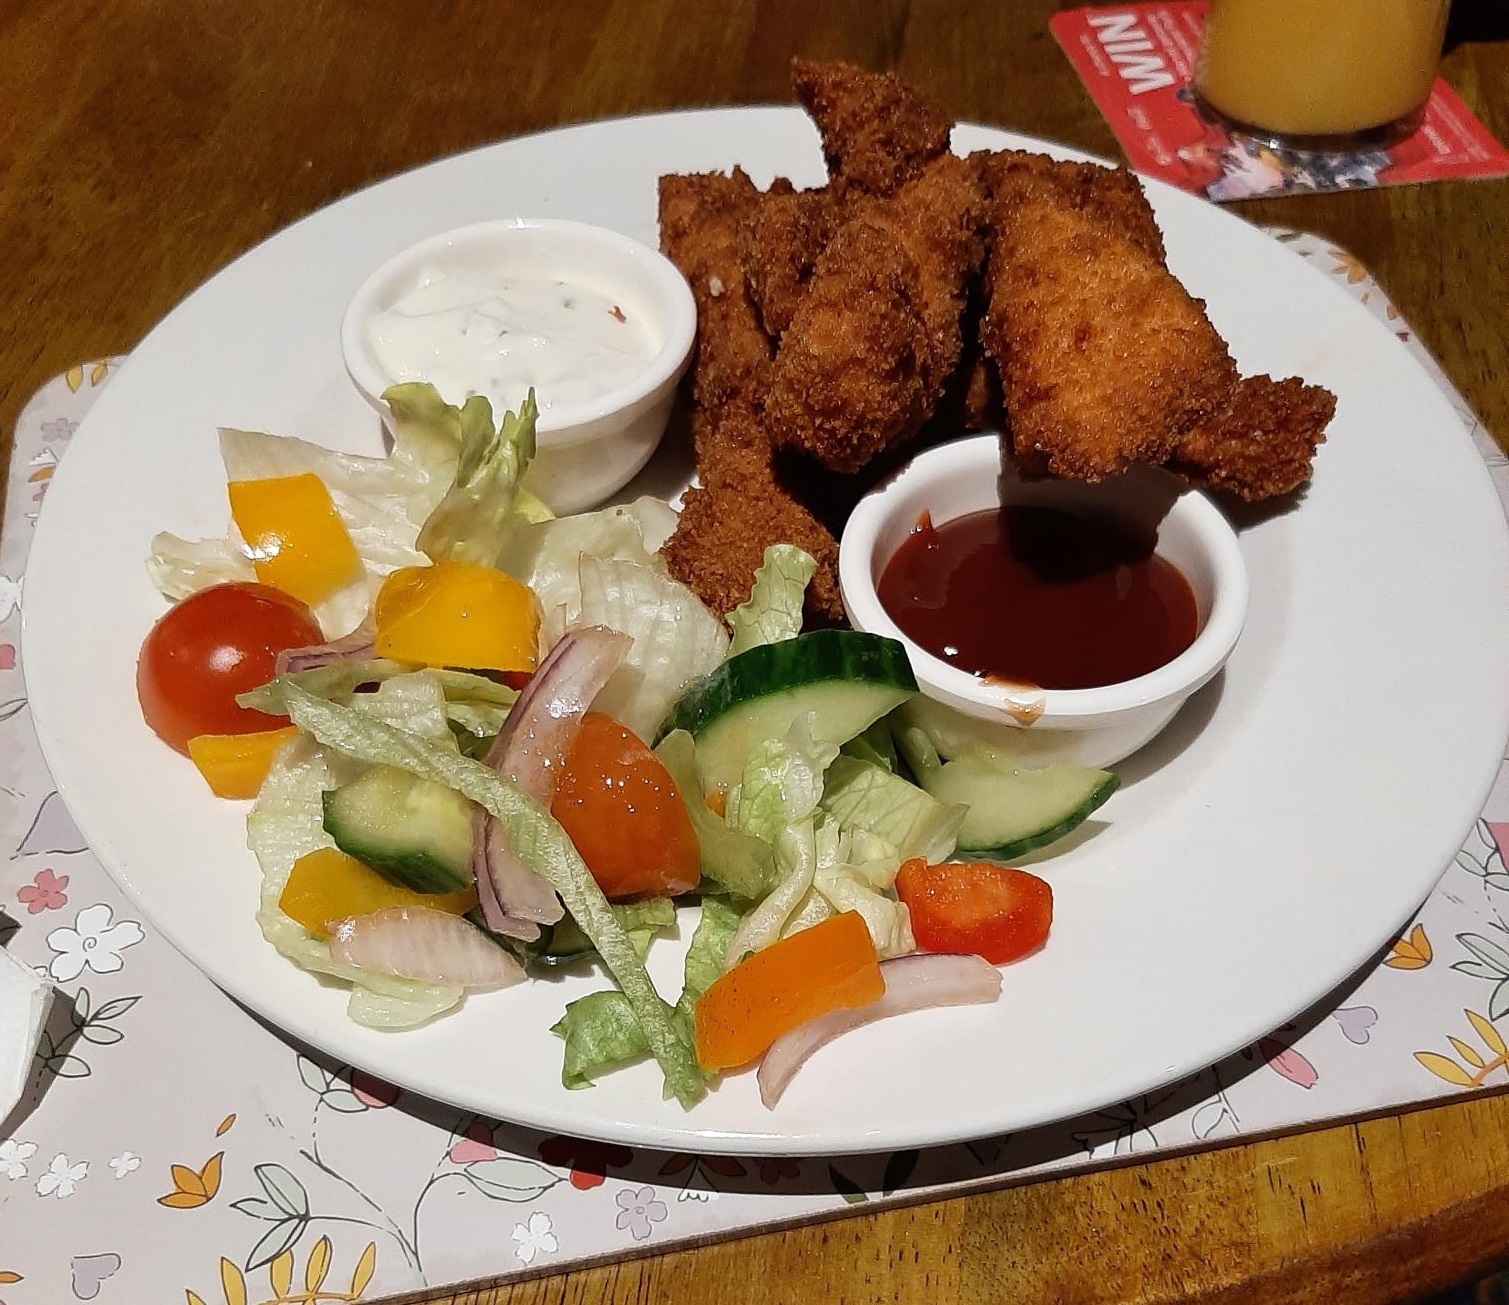 Homemade chicken goujons - a hearty starter so we were glad we shared